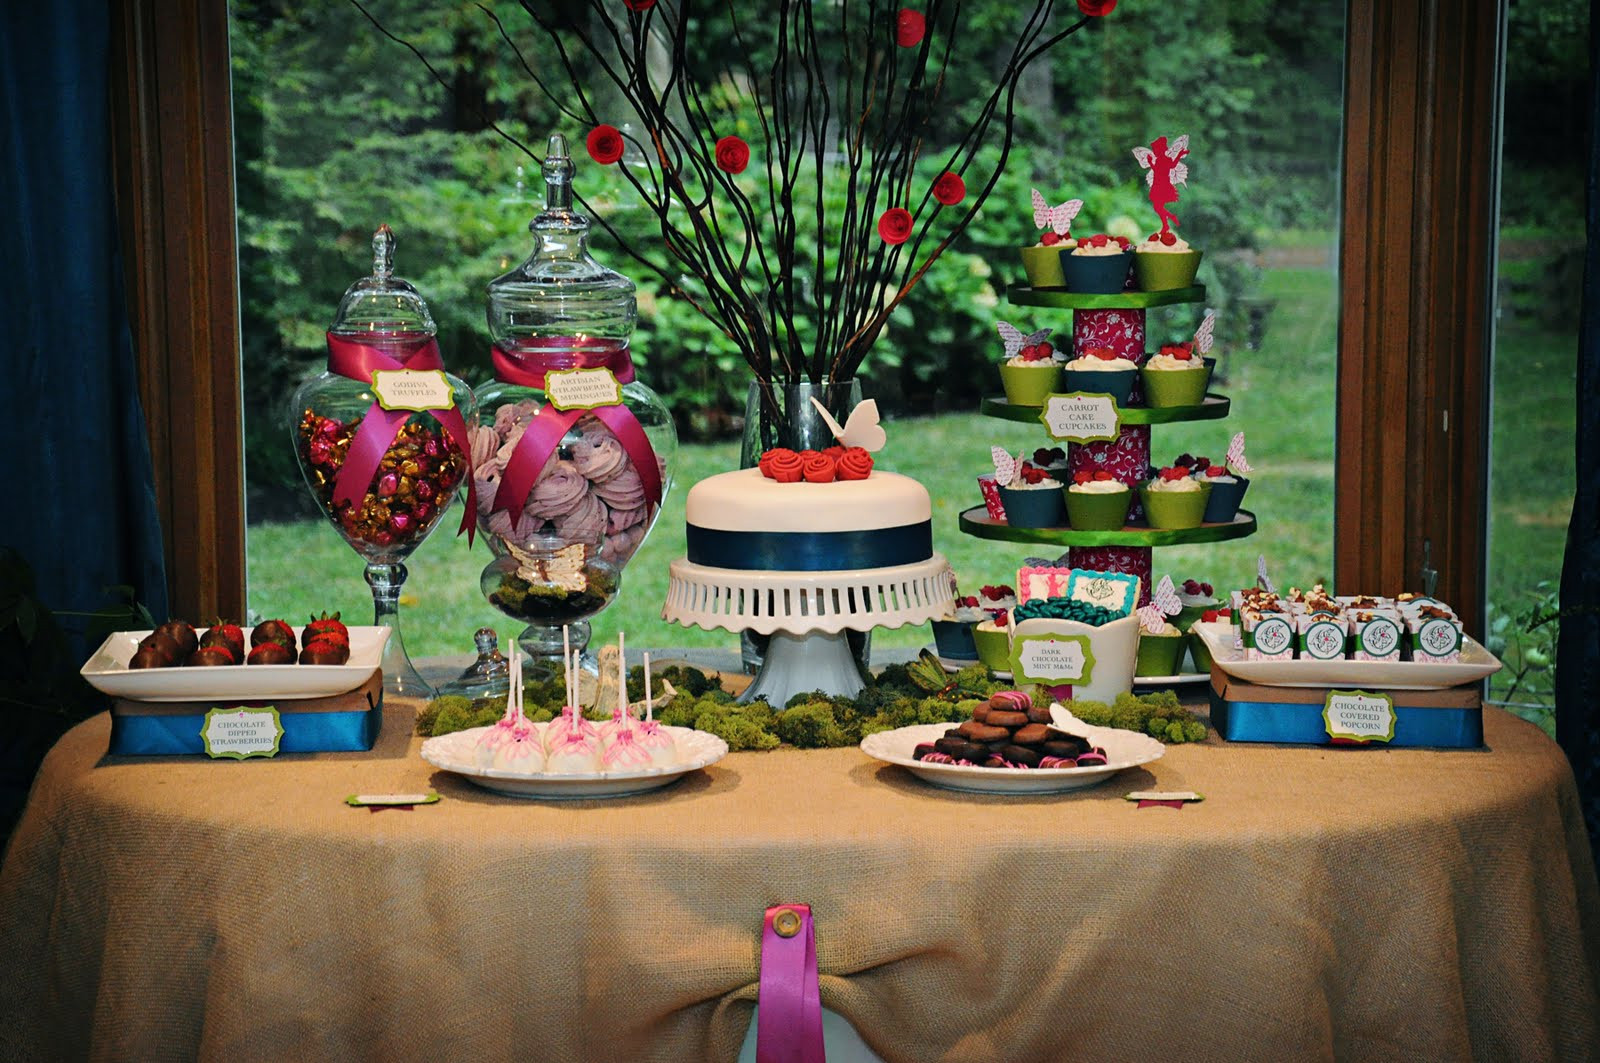 Party Ideas For Adults At Home
 An Adult Garden Fairy Birthday Celebrations at Home